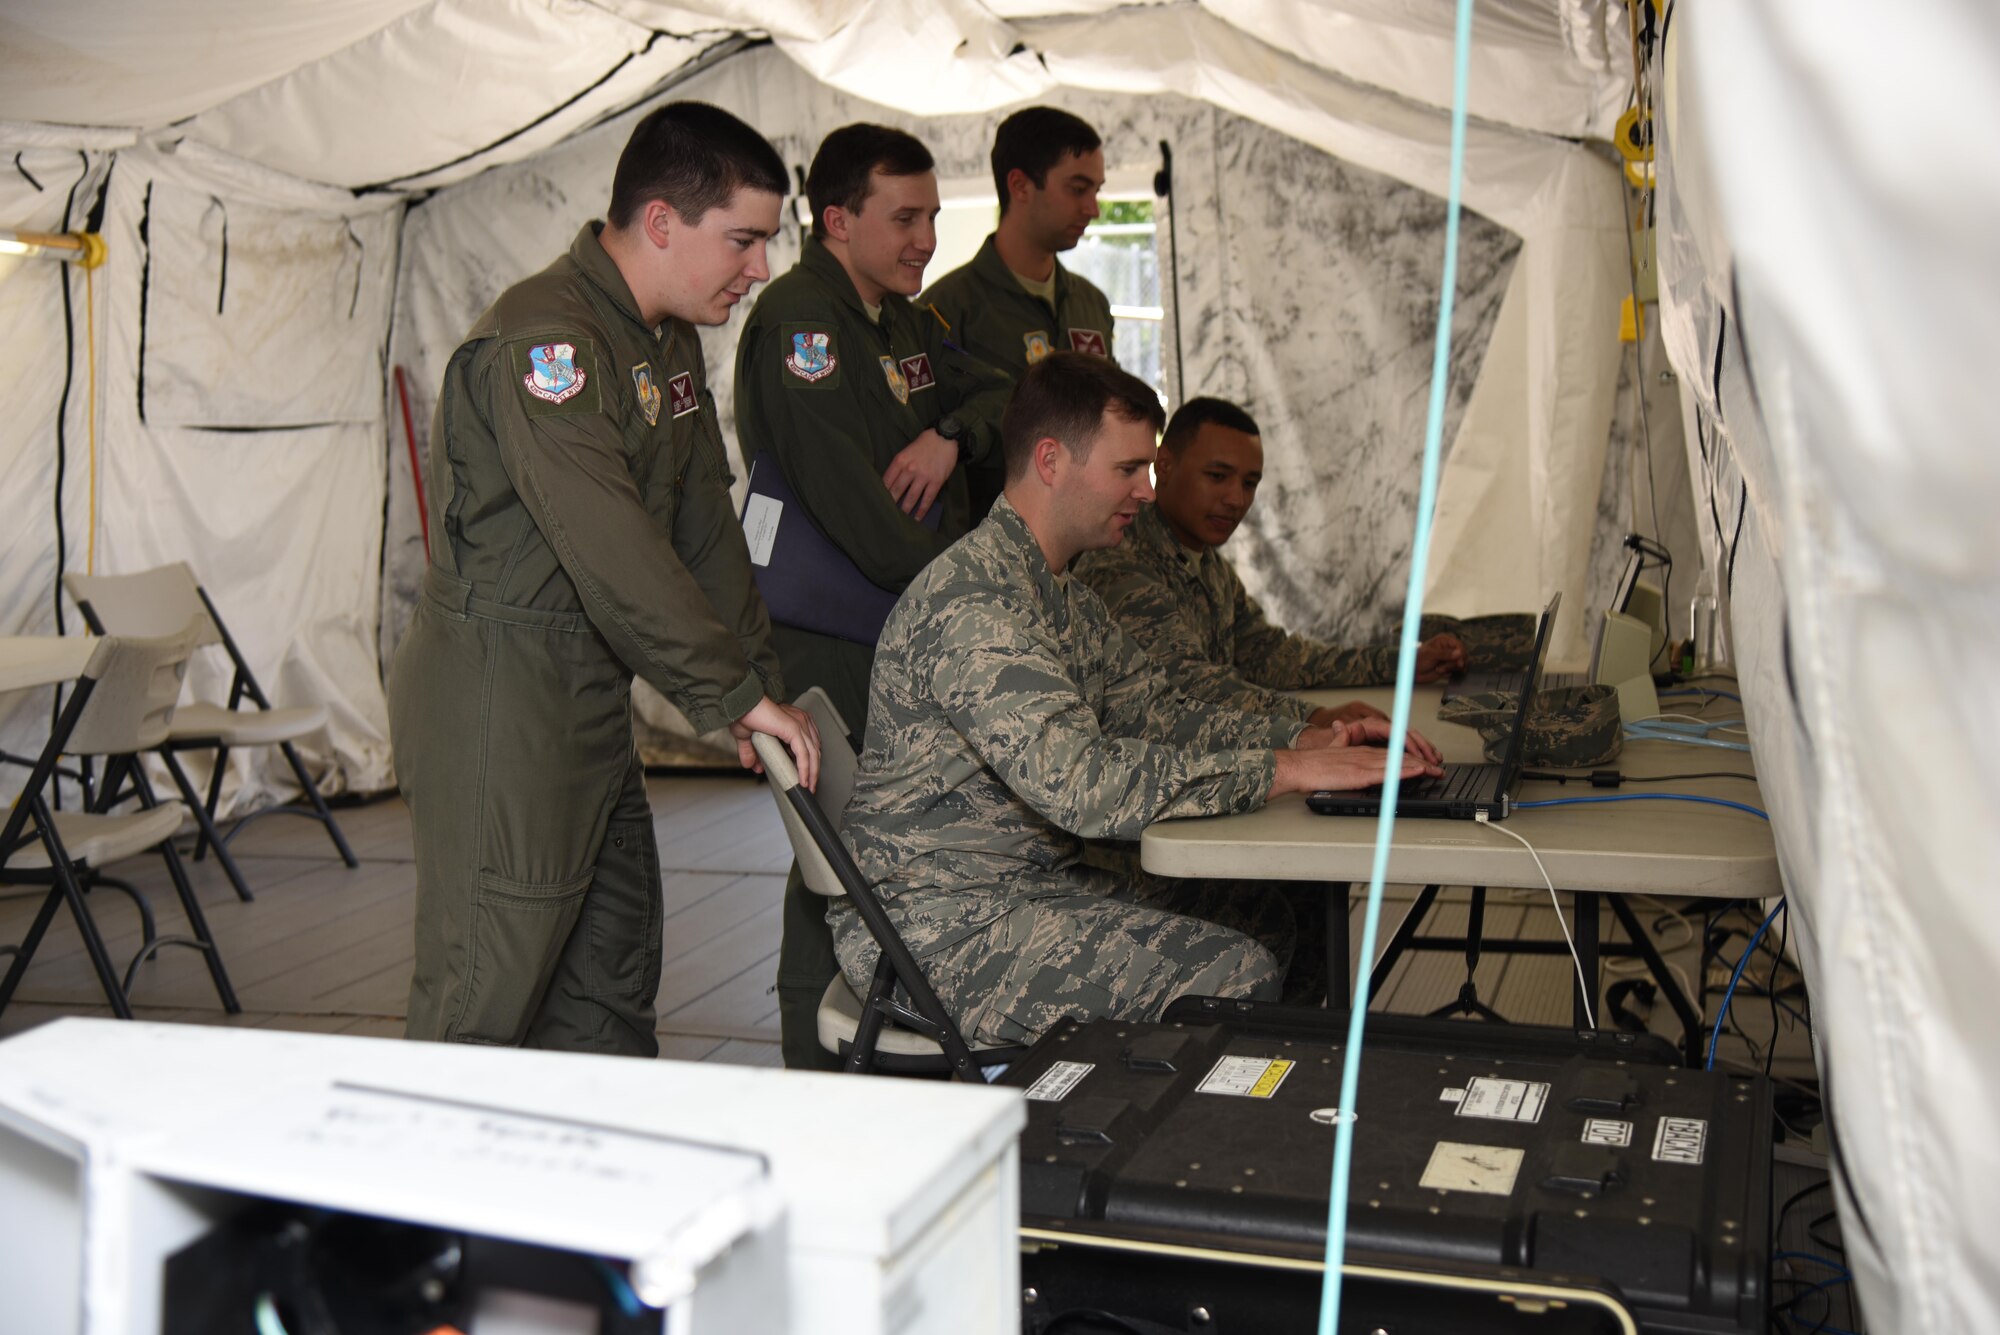 Air Force ROTC cadets simulate troubleshooting on an expeditionary network for the cyber transport systems career field during Pathways to Blue April 7, 2017, on Keesler Air Force Base, Miss. Pathways to Blue is a diversity and inclusion outreach event hosted by 2nd Air Force with the support of the 81st Training Wing and the 403rd Wing. The event provided the 178 cadets who traveled here from seven detachments a chance to interact with officers from 36 different specialties from across the Air Force. (U.S. Air Force photo by Kemberly Groue)

